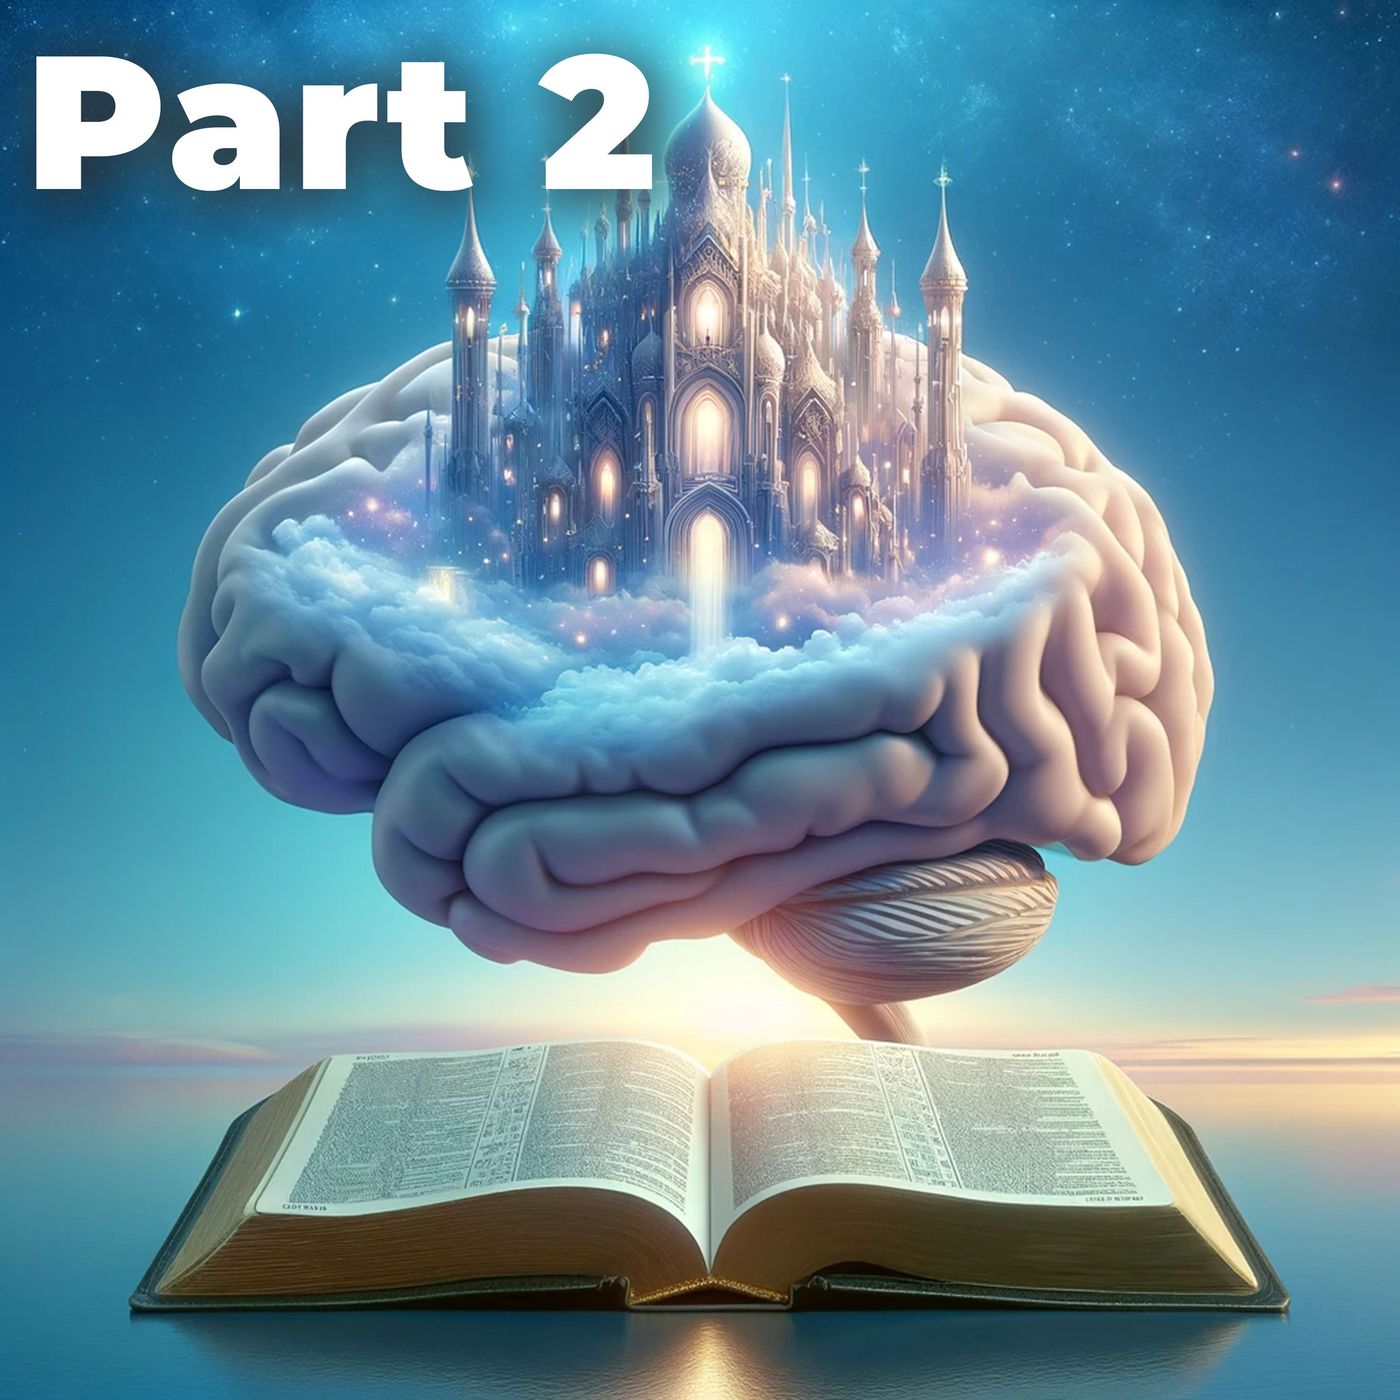 How to Add Bible Verses to a Mind Palace (Part 2)